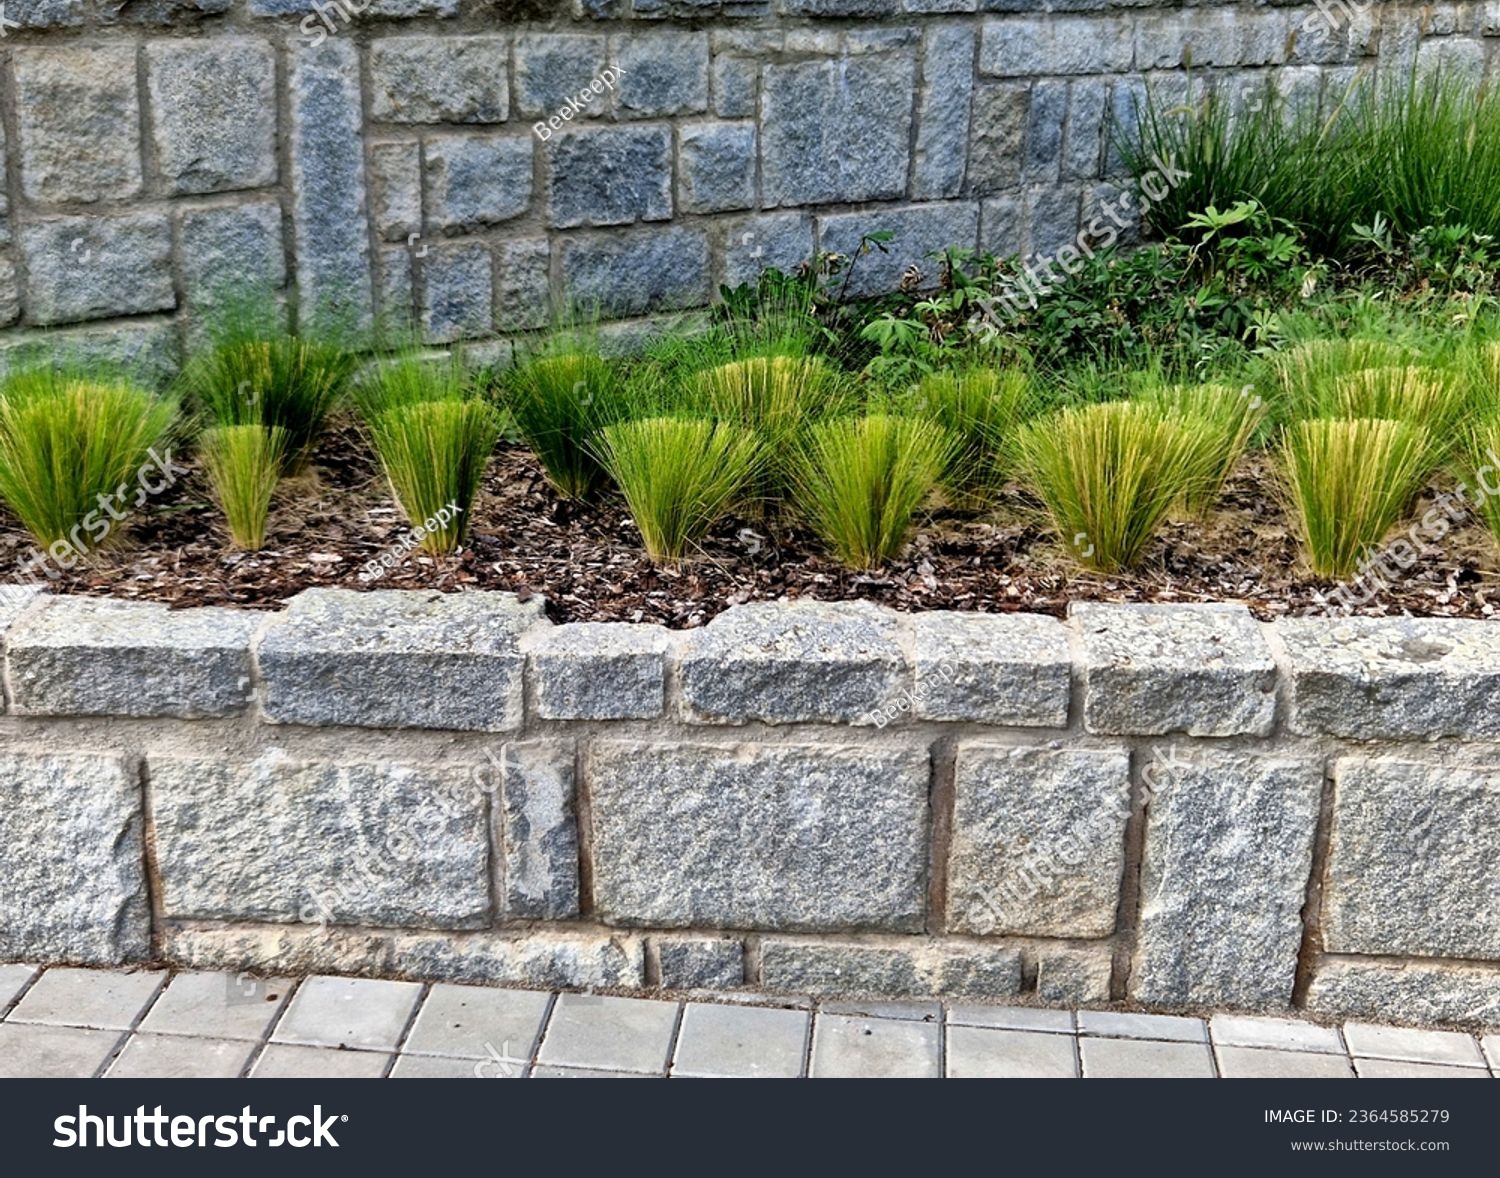 Granite walls made of stone blocks serve as design elements, retaining walls, or seating areas, seats for park visitors. parking for bicycles with metal frames and benches made of horizontal wires #2364585279